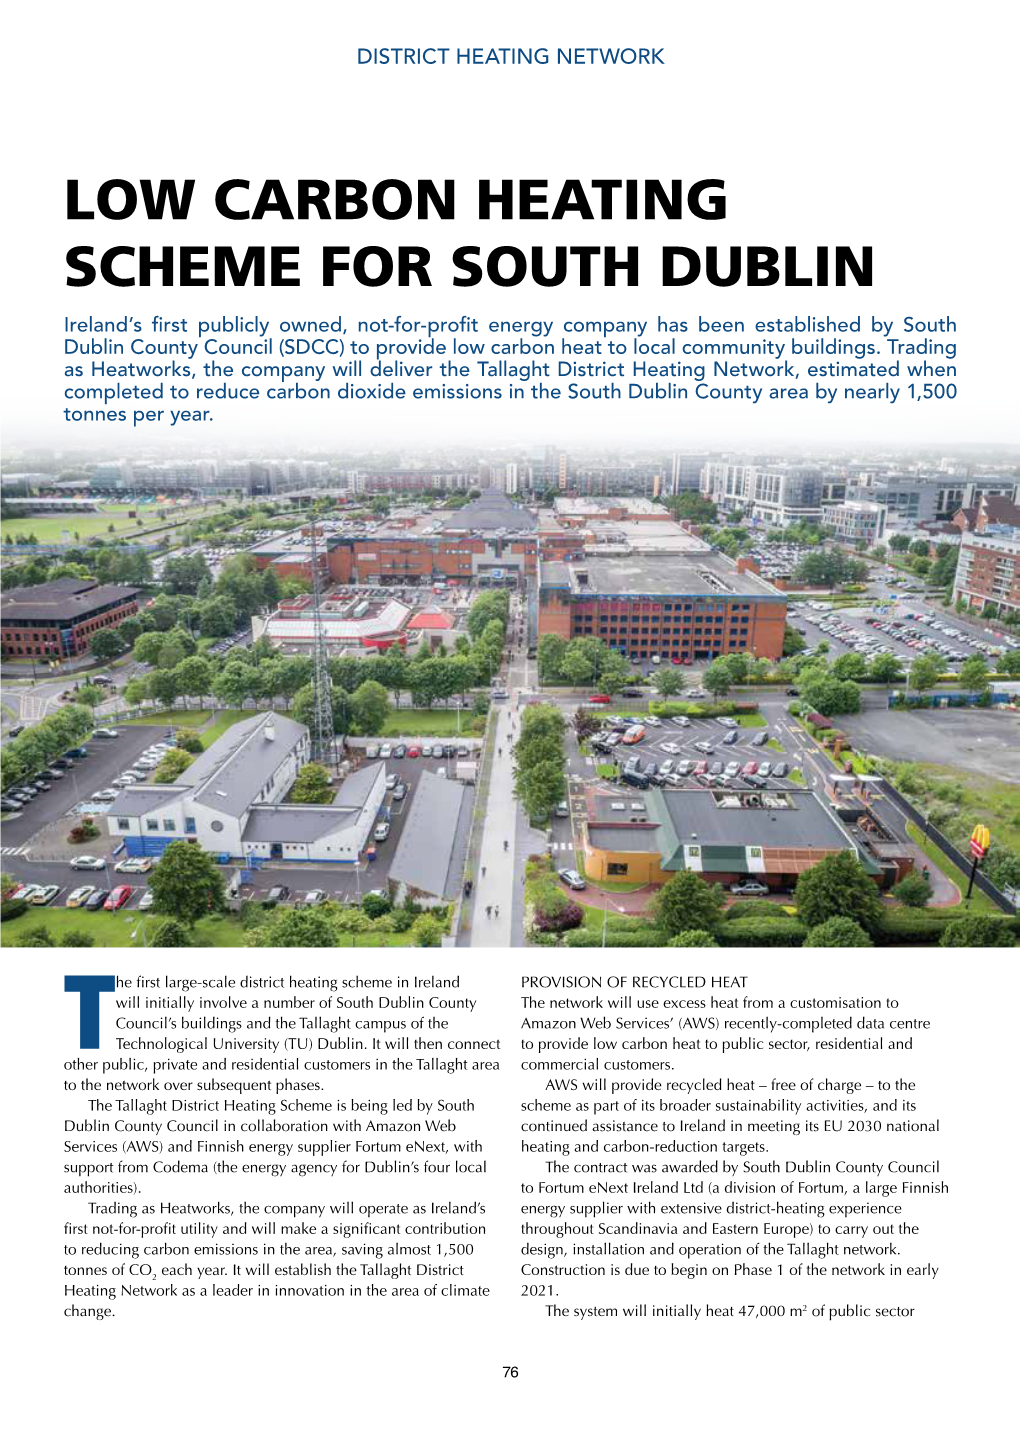 Low Carbon Heating Scheme for South Dublin